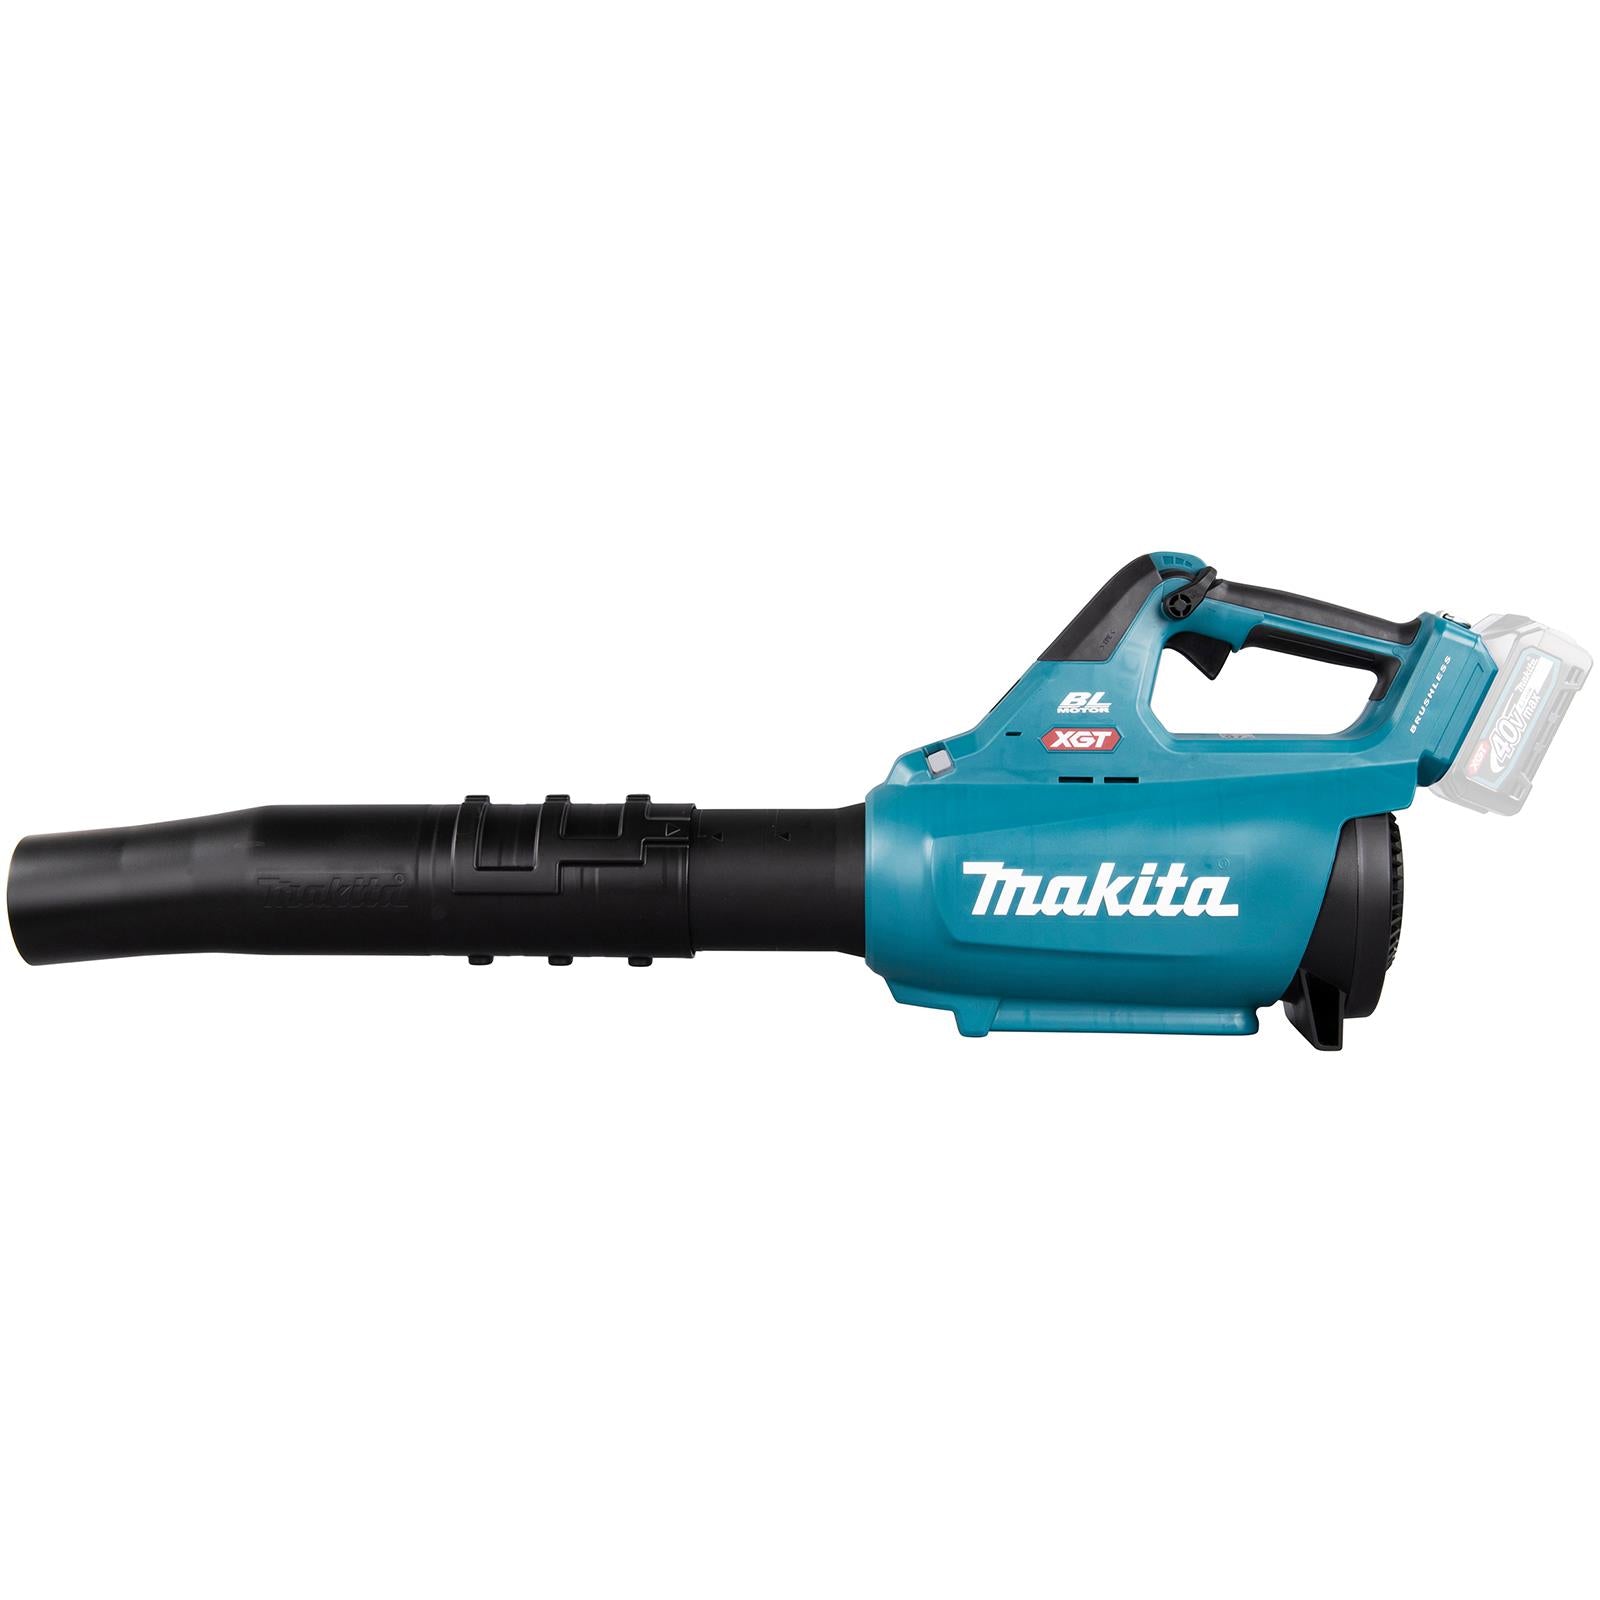 Makita Leaf Blower 40V XGT Brushless Cordless 17N Garden Grass Clippings Construction Bare Unit Body Only UB001GZ